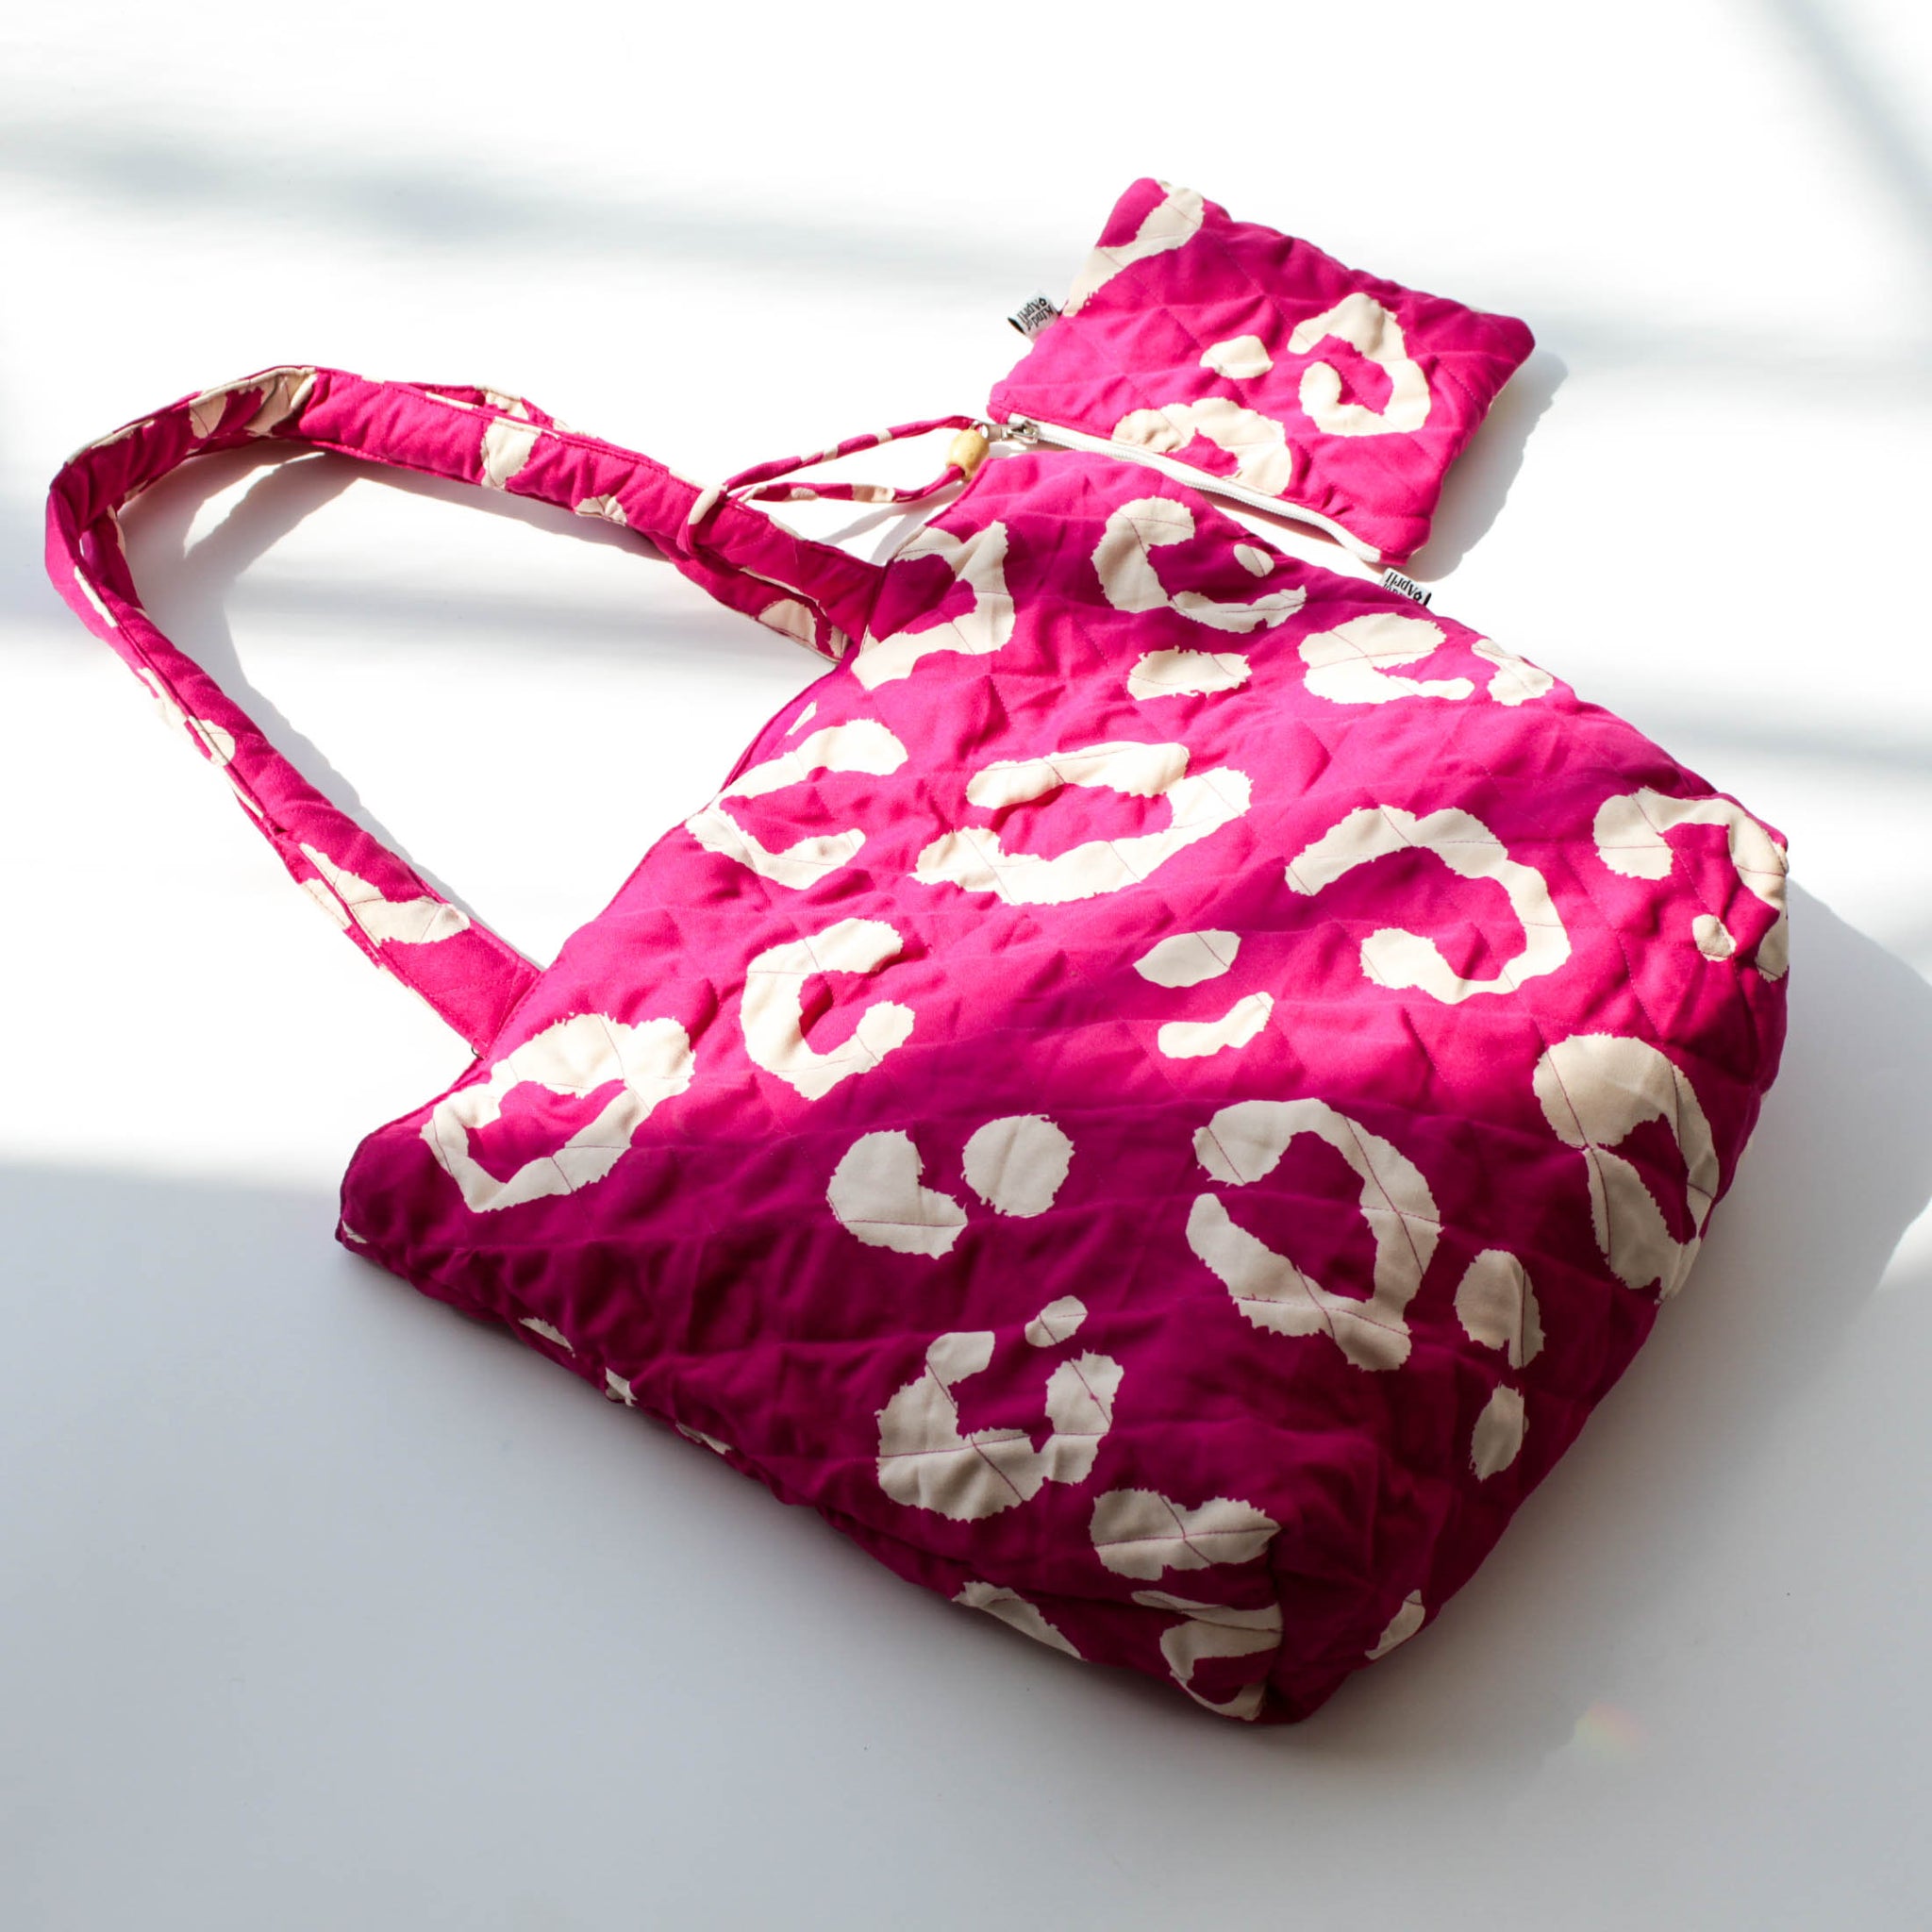 Pink and white affair Quilted Bag with a pouch